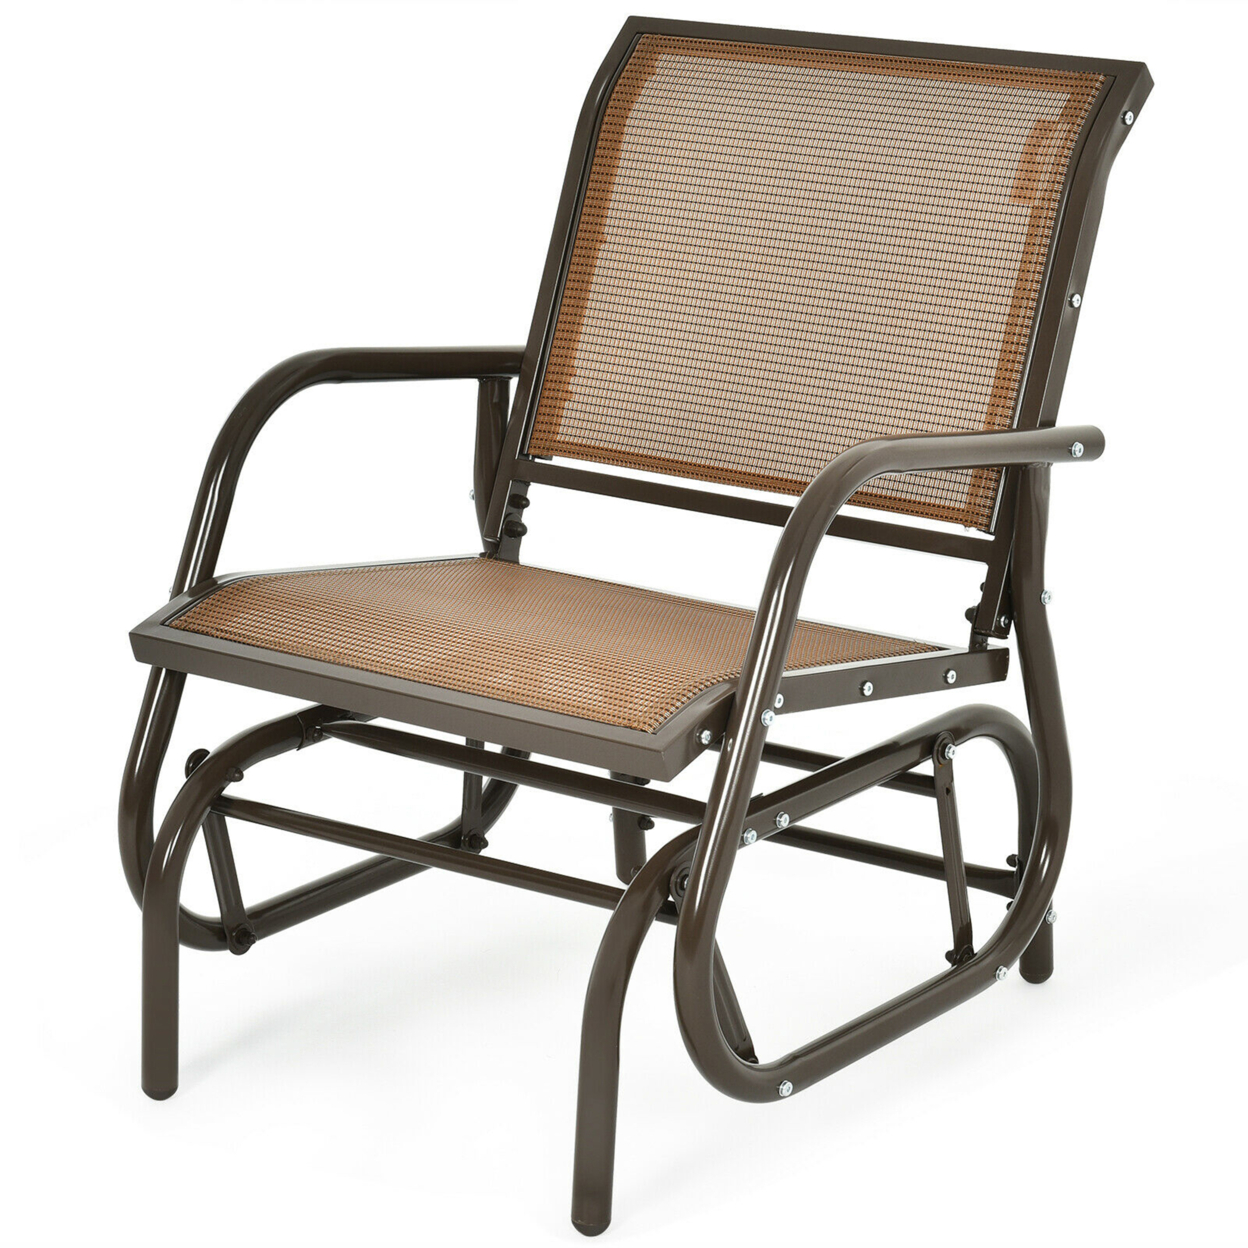 2PCS Patio Swing Glider Chair Single Rocking Chair Yard Outdoor Brown